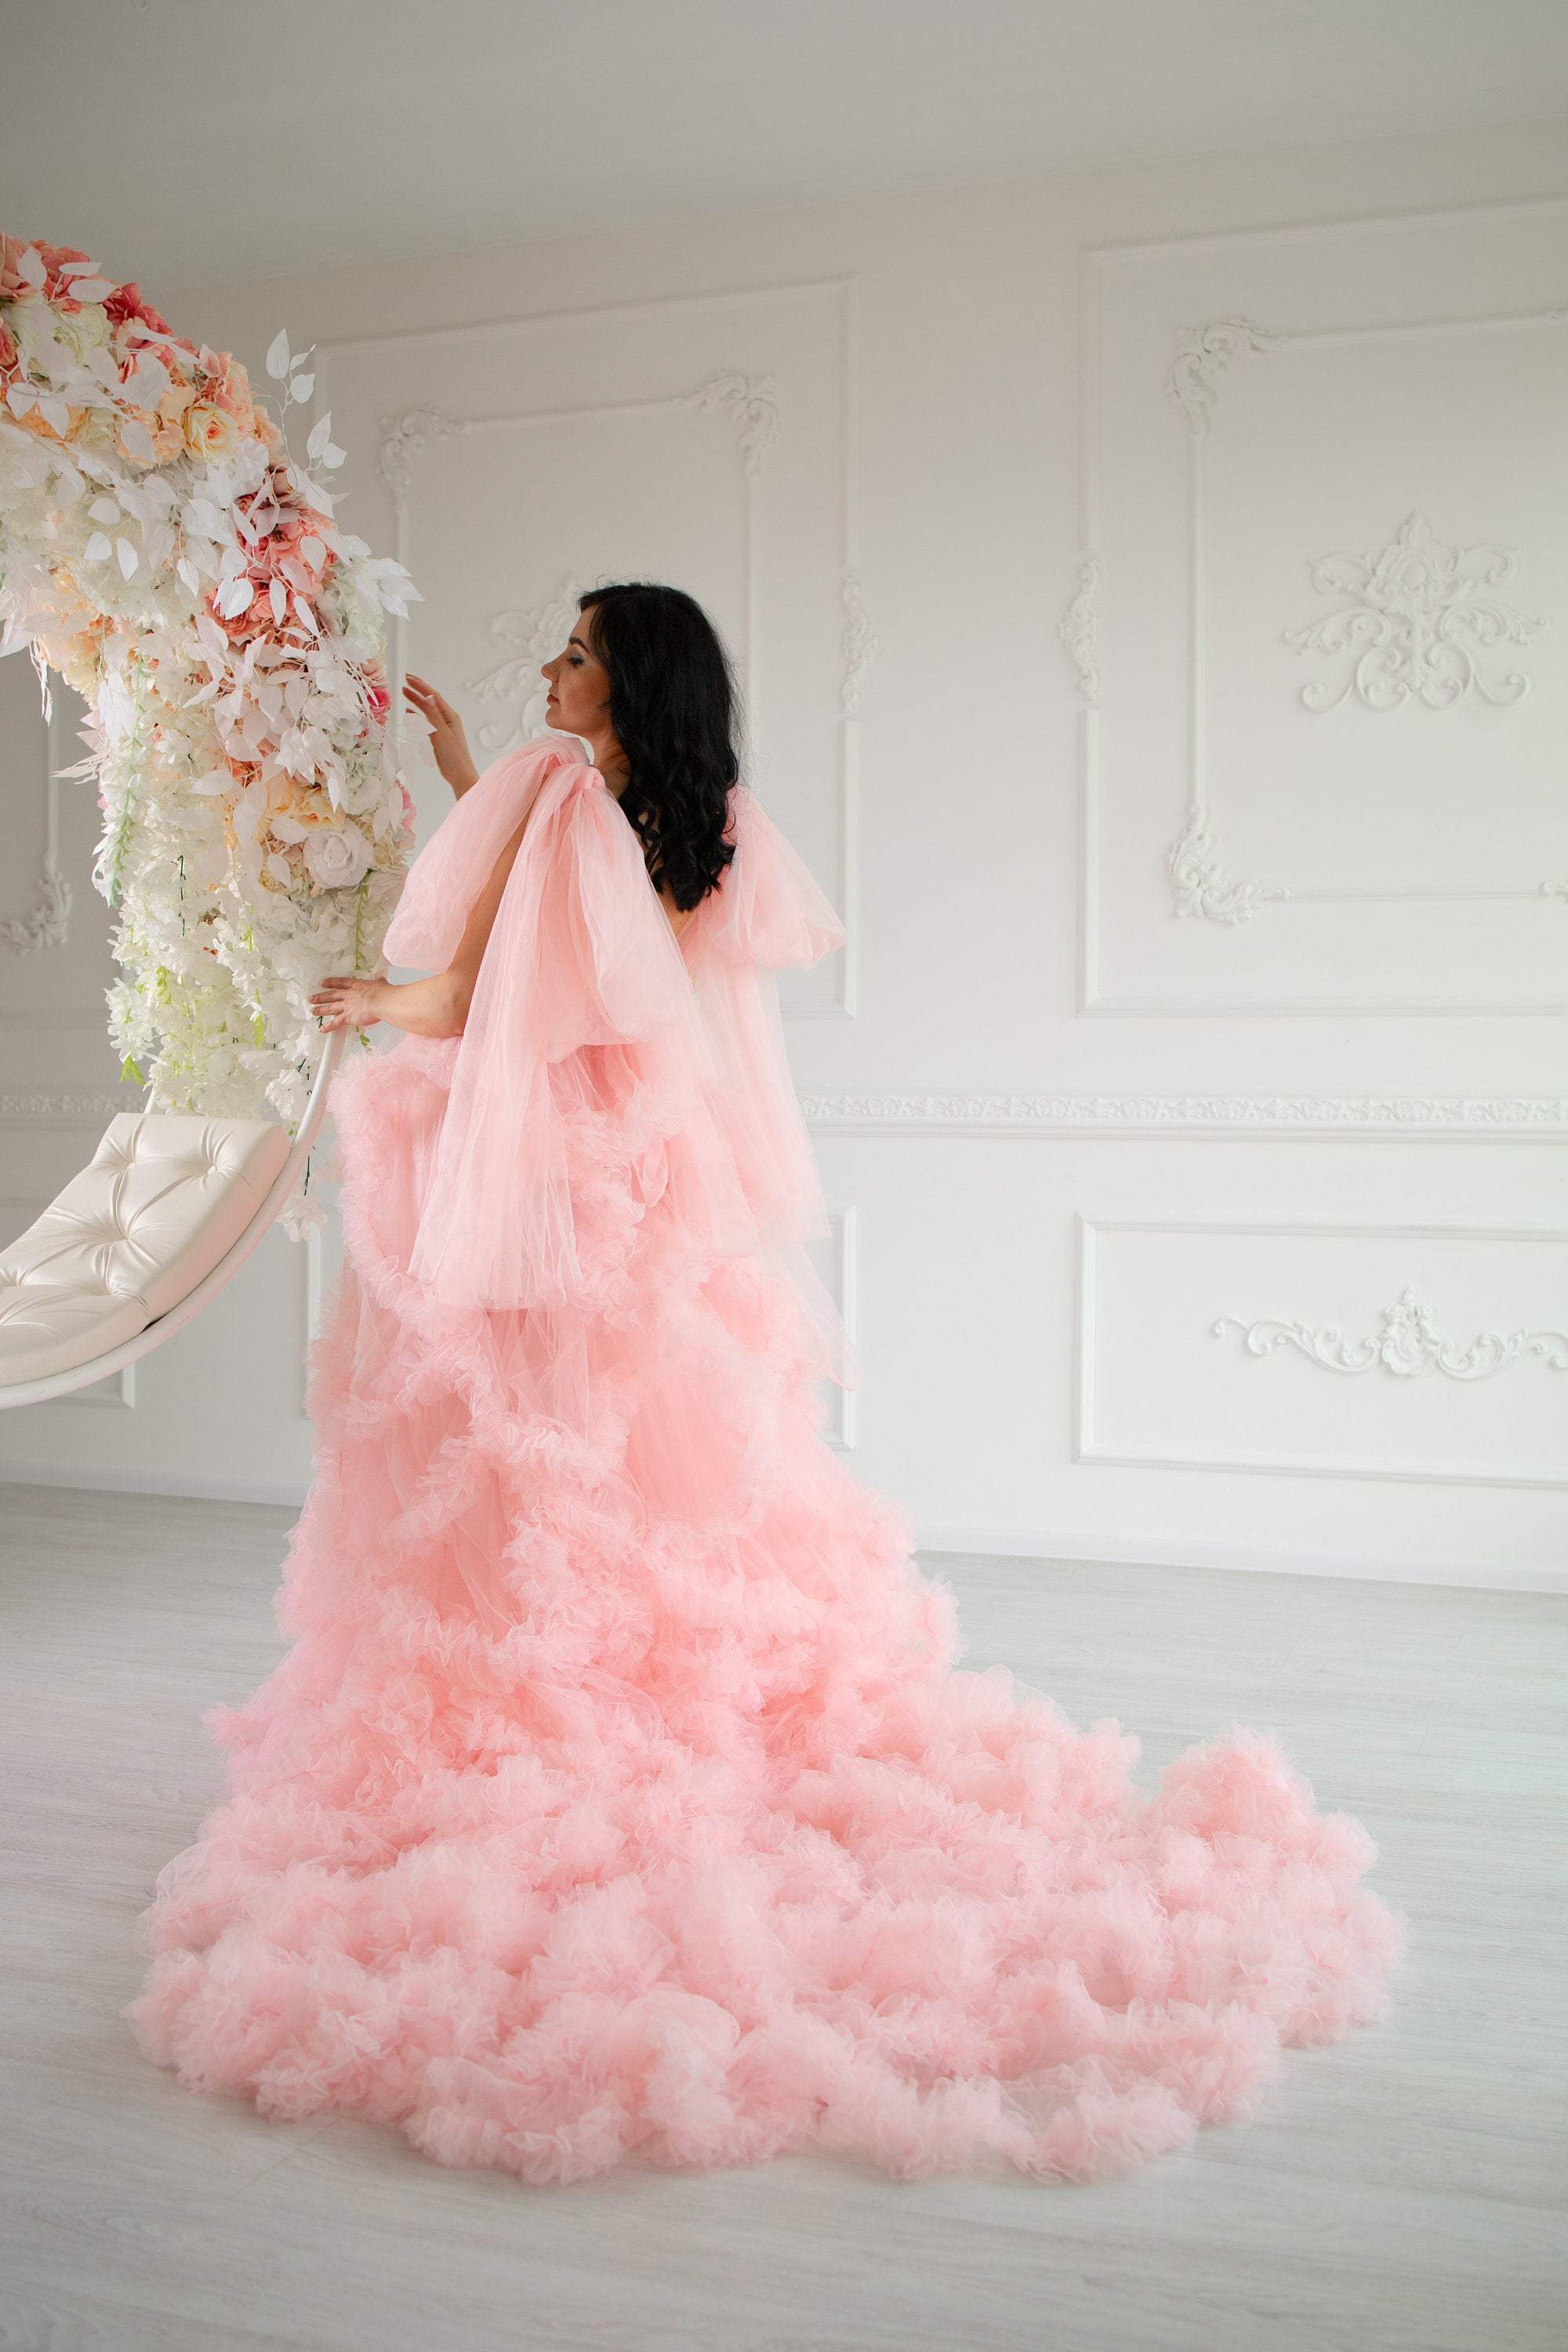 Matchinglook Pink Maternity Robe, Frilled Maternity Gown, Pink Tulle Robe, Maternity Photoshoot Robe, Boudoir Tulle Dress, Sheer Ruffle Gown Robe Cream / One Size